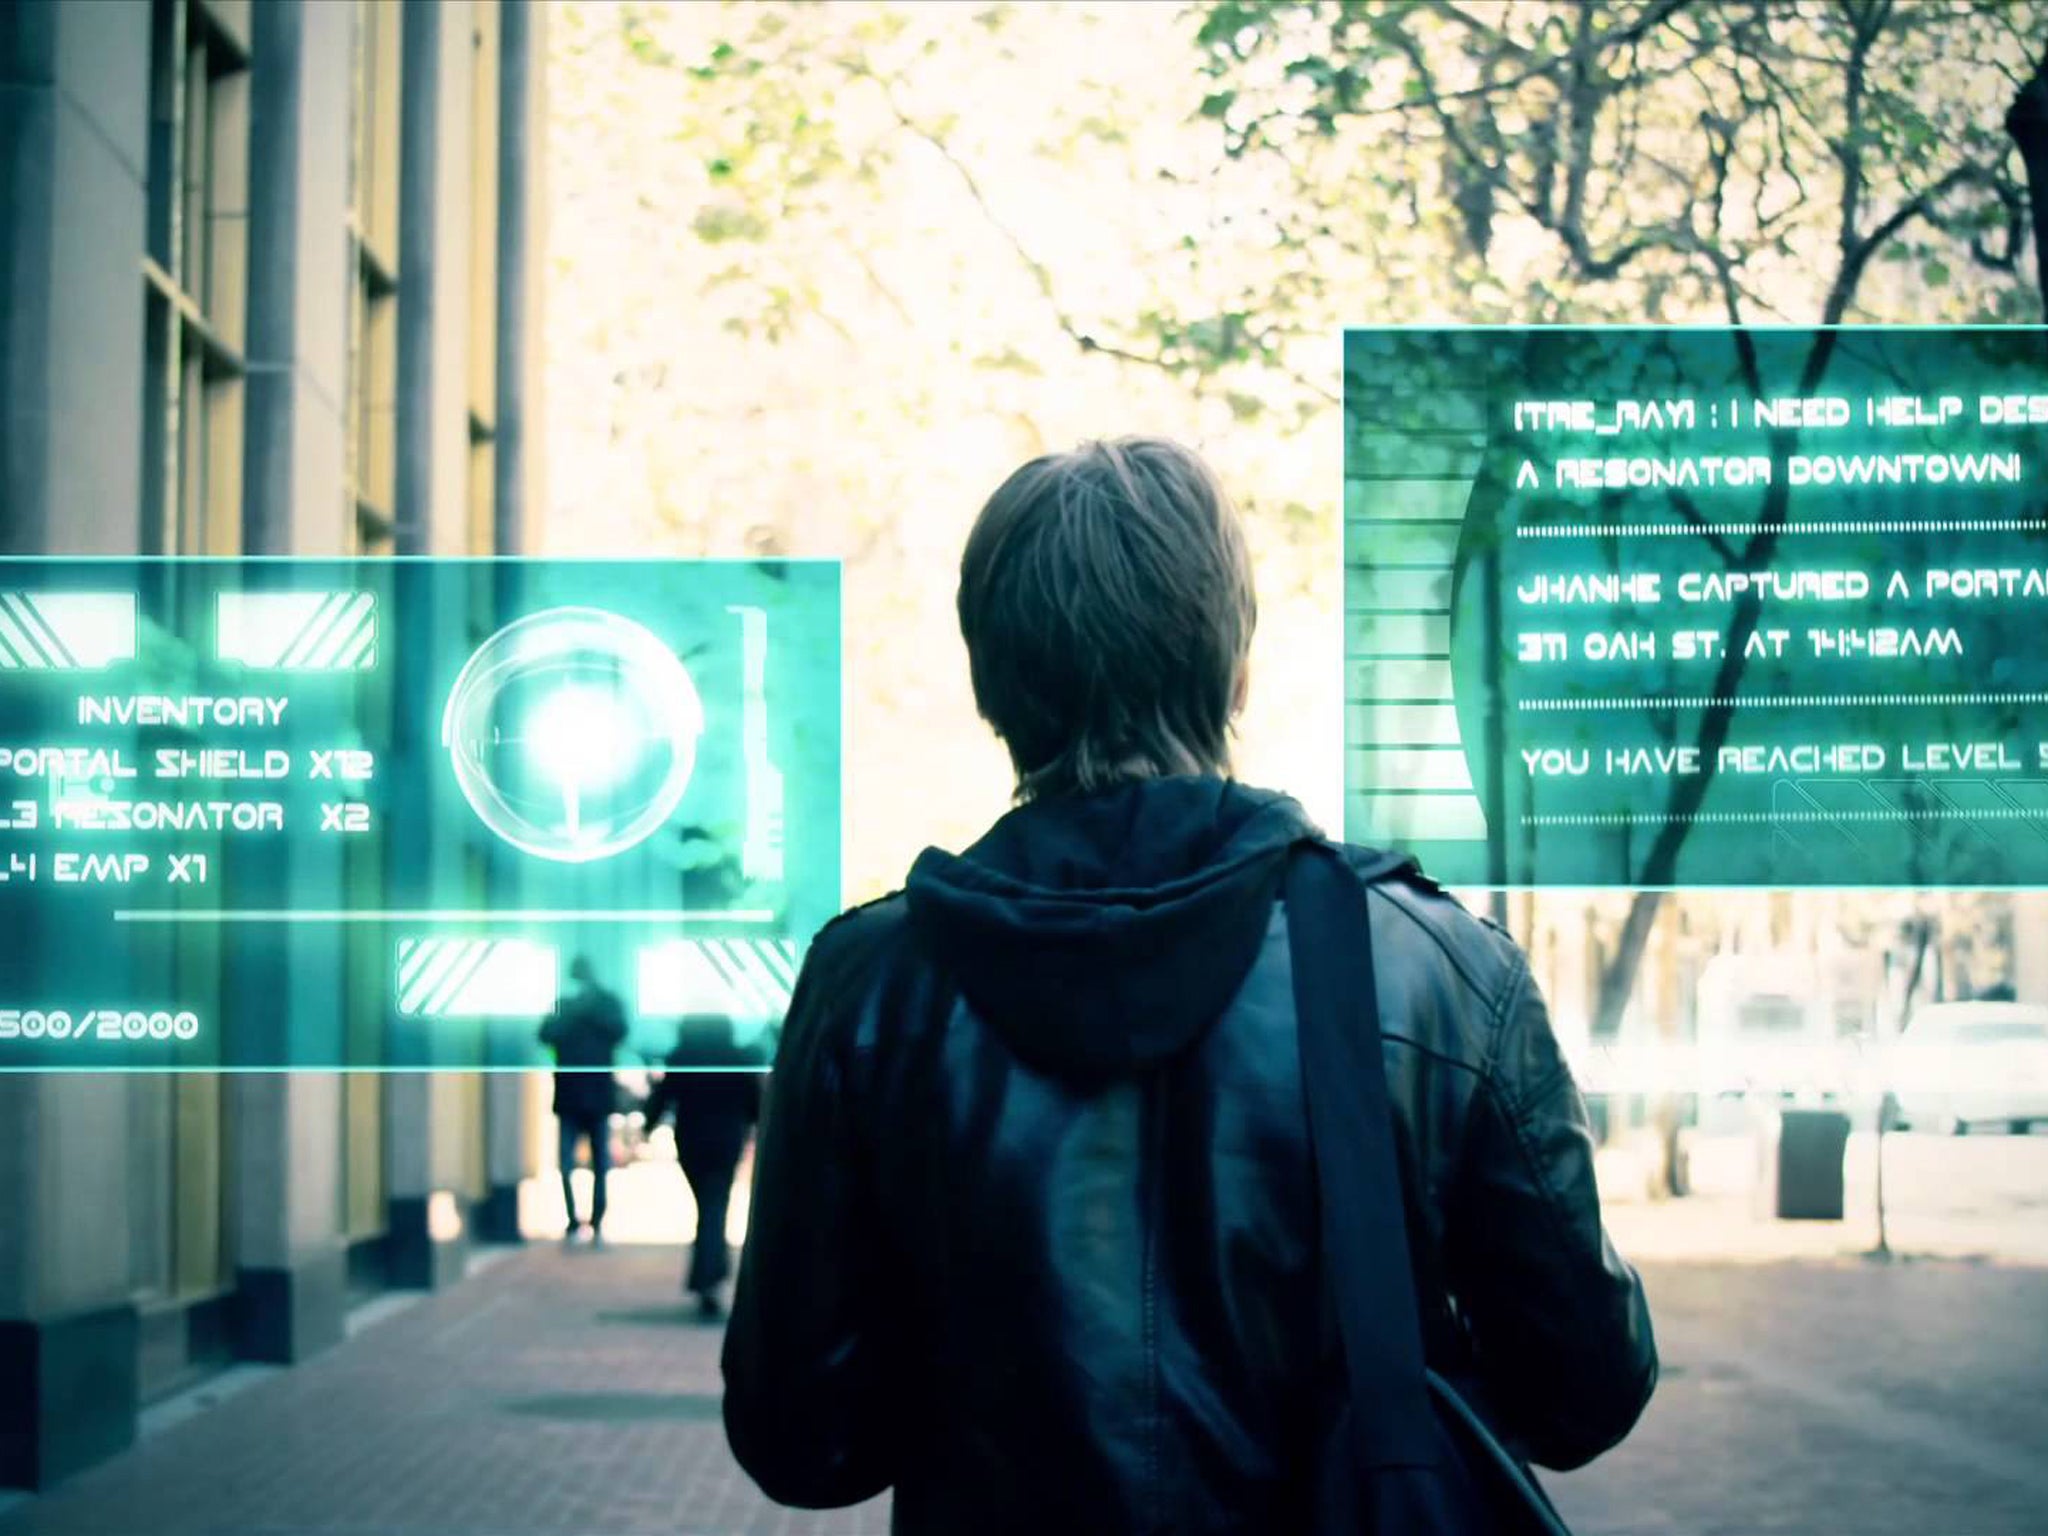 A shot from promotional material for the 'Ingress' game